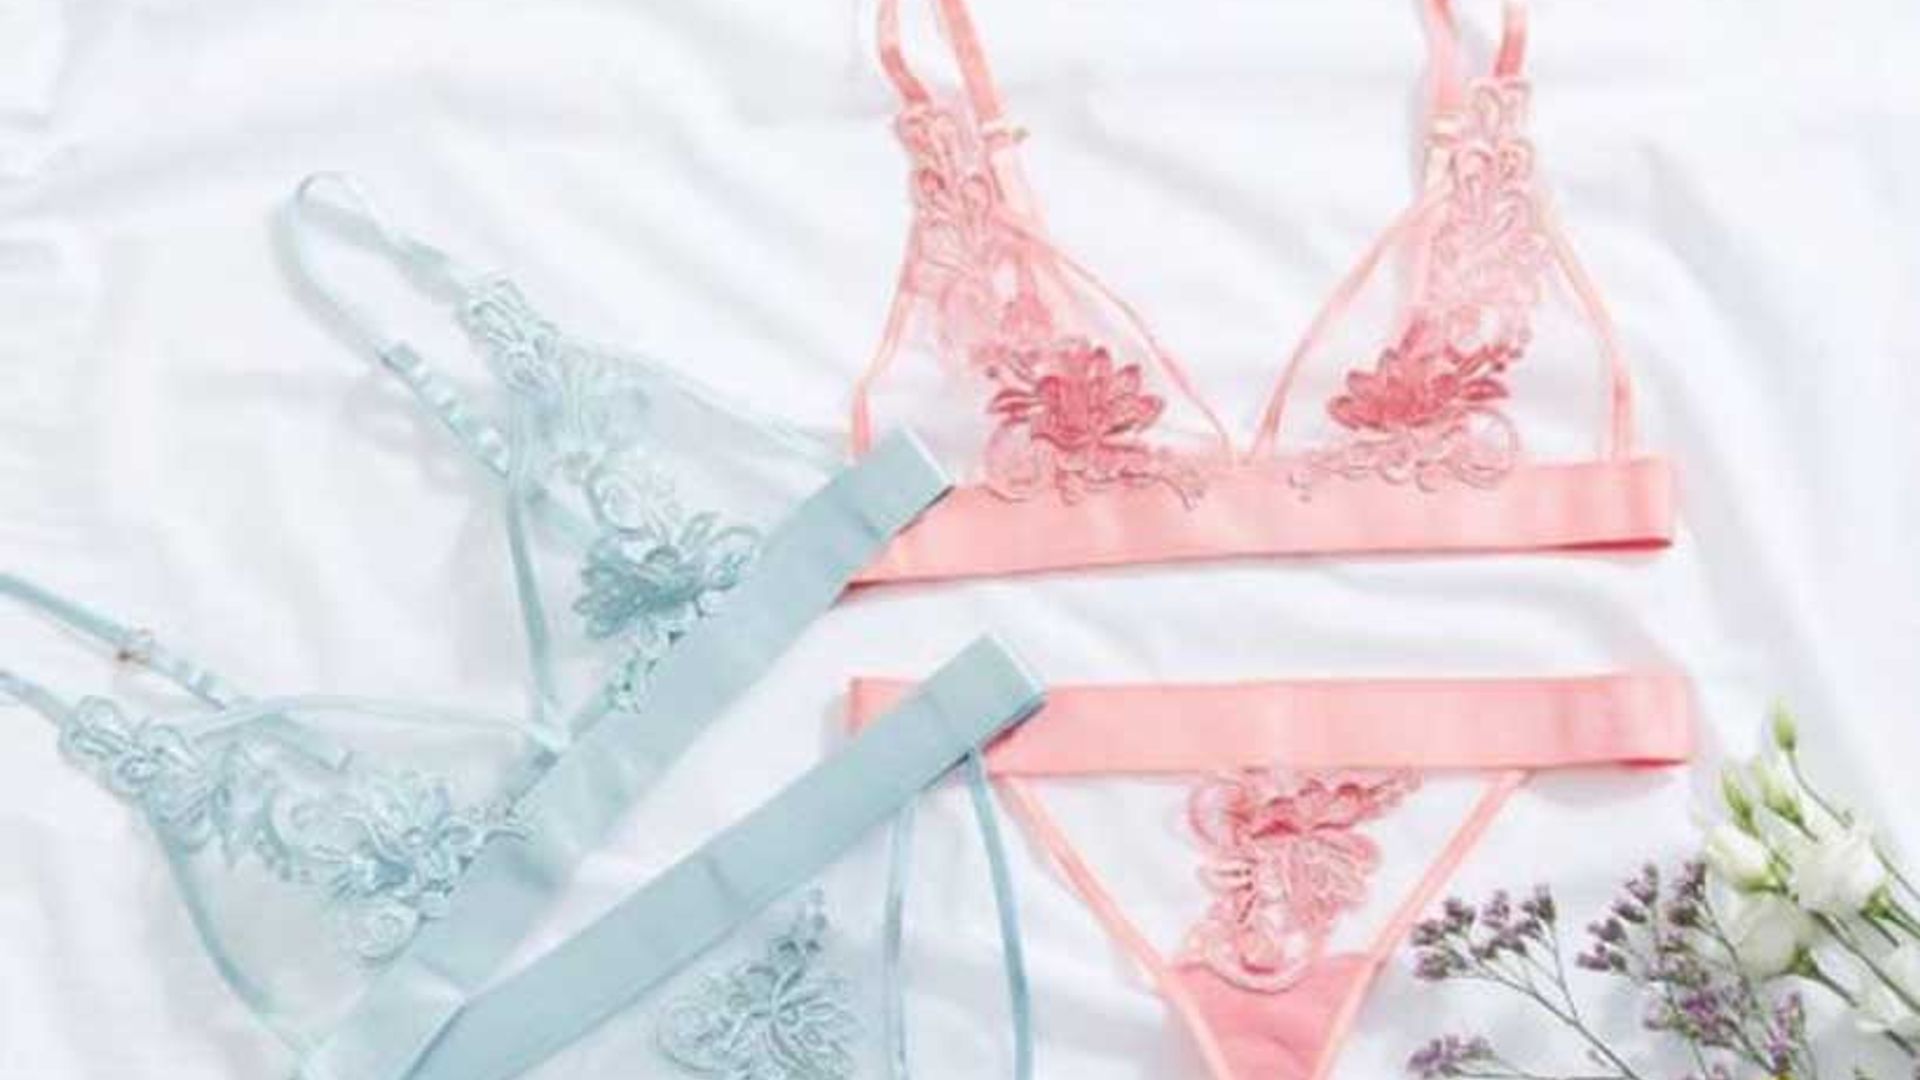 Primark on X: Go on, treat yourself this January! ❤ Lace bra £9/€11/$10 # Primark #fashion  / X